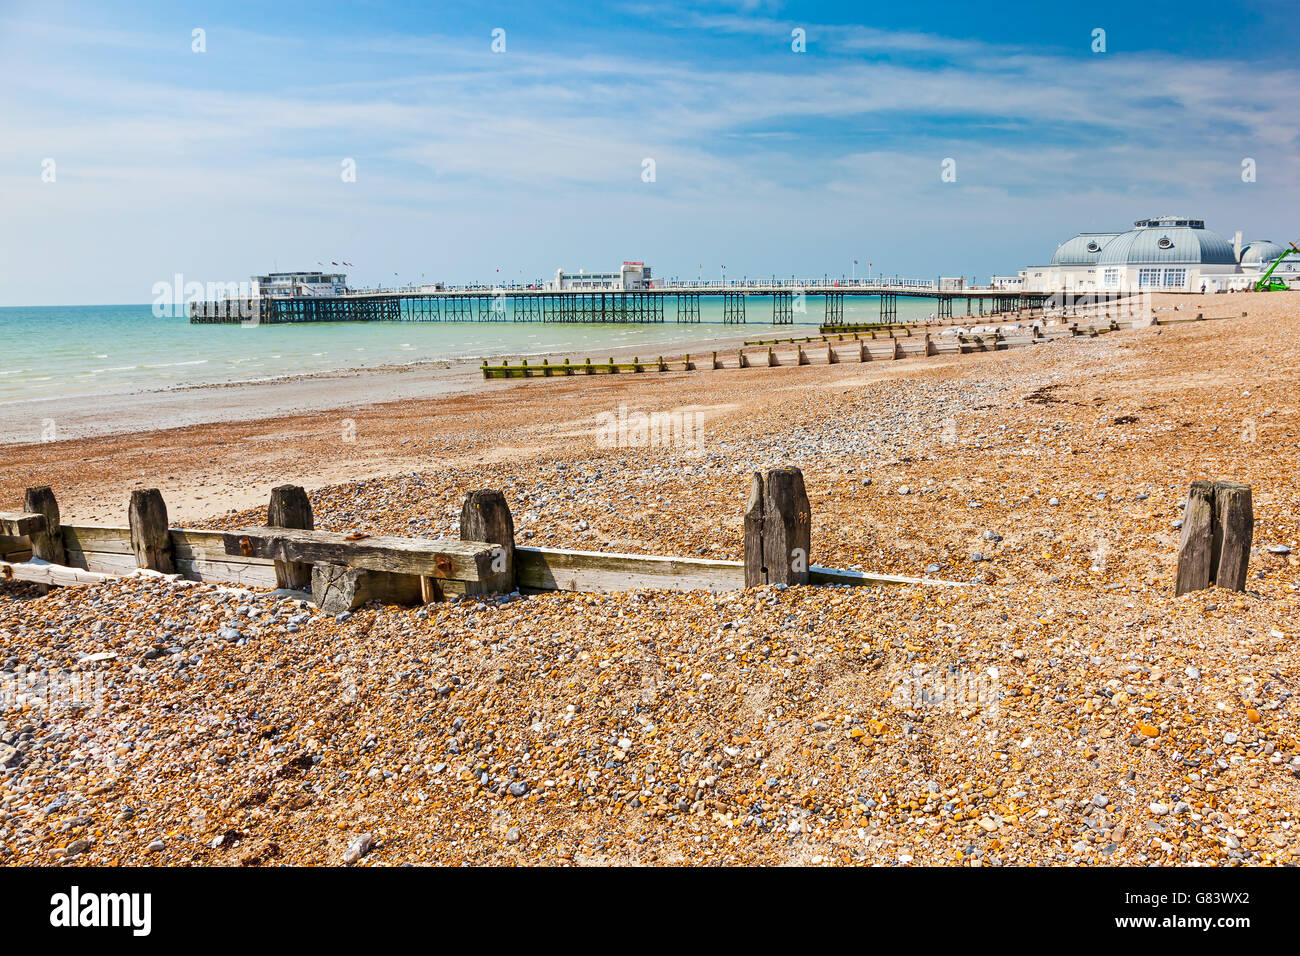 The beach and pier at Worthing West Sussex England UK Europe Stock Photo